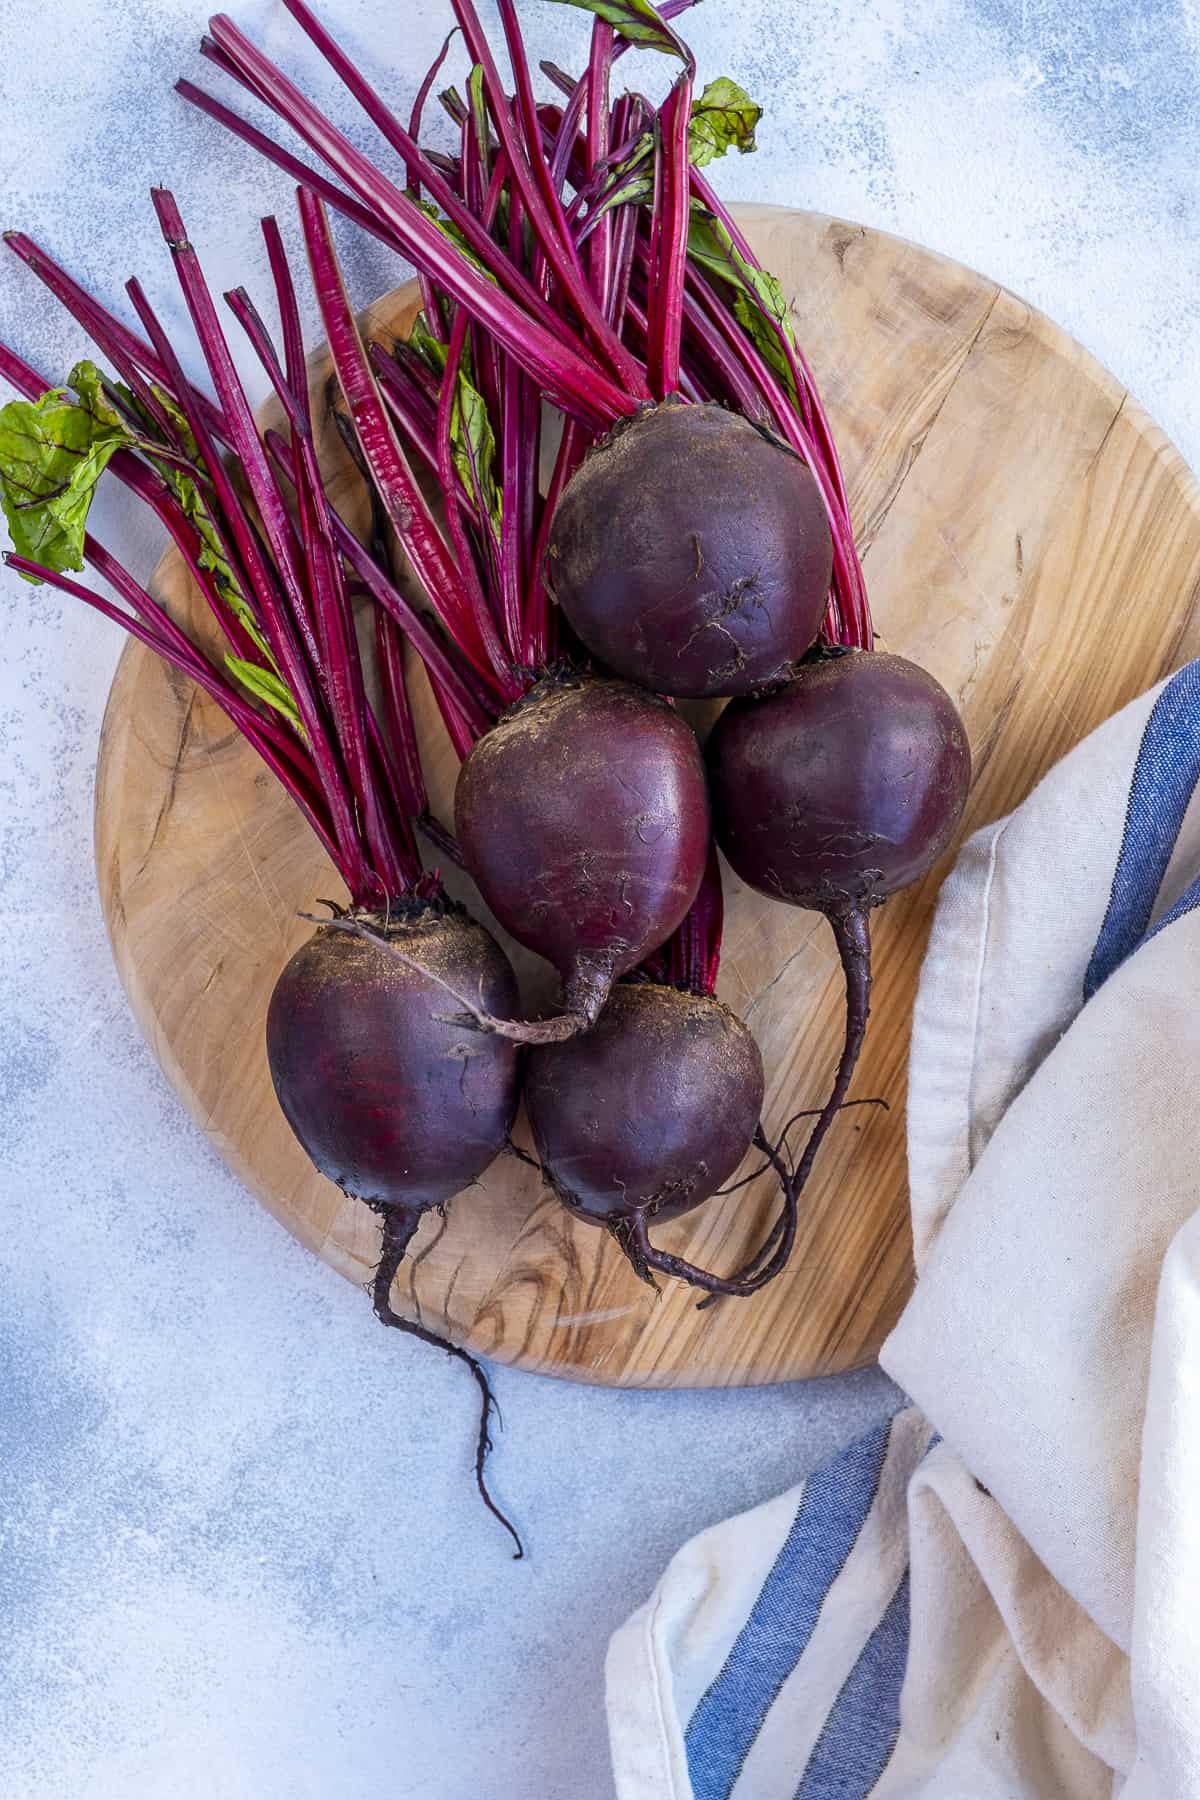 Raw beets on a wooden board.